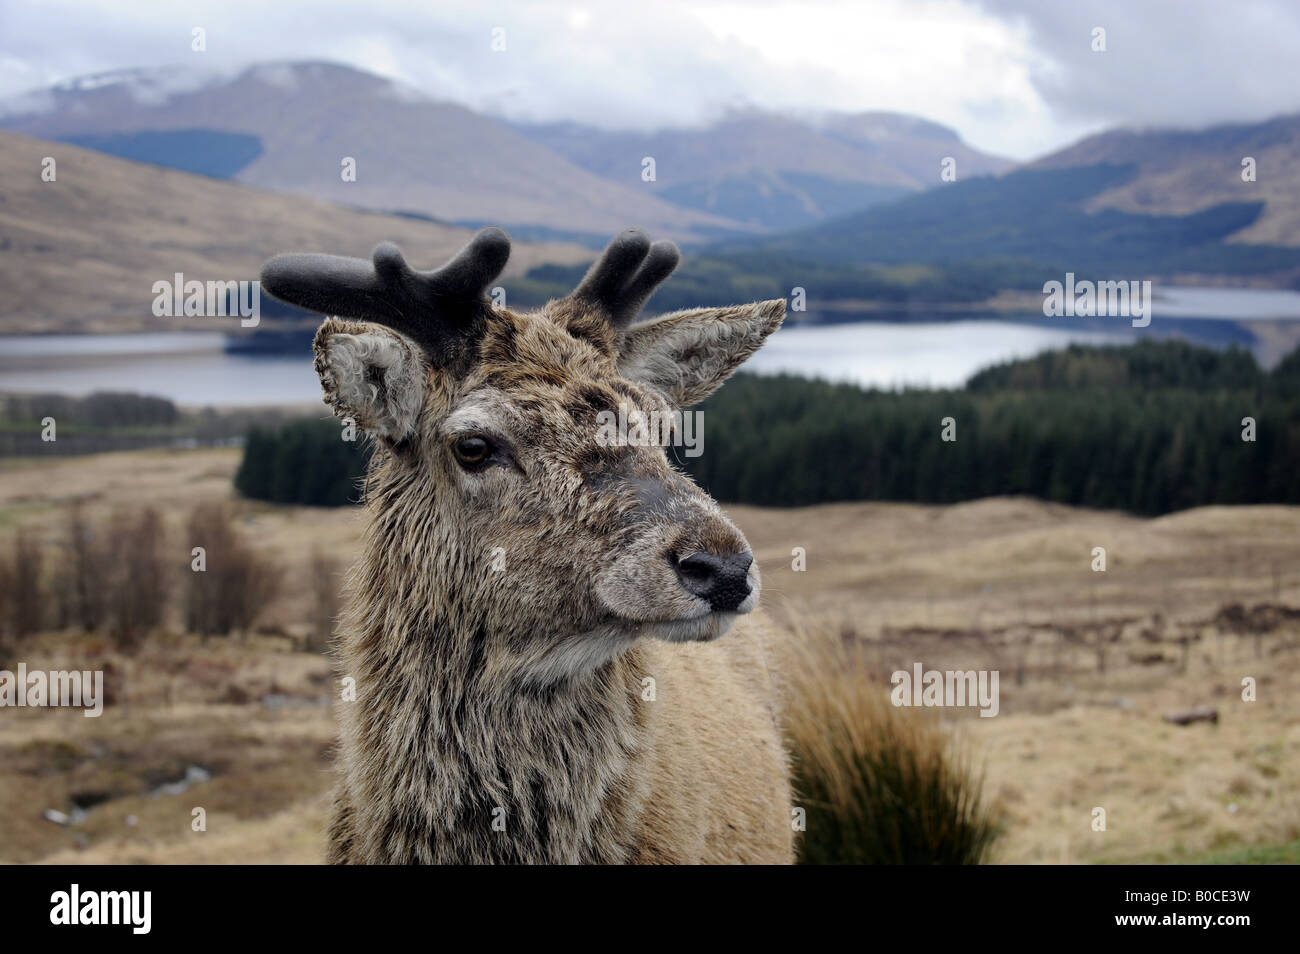 A NATIVE SCOTTISH DEER PICTURED IN THE HIGHLANDS OF SCOTLAND,UK. Stock Photo